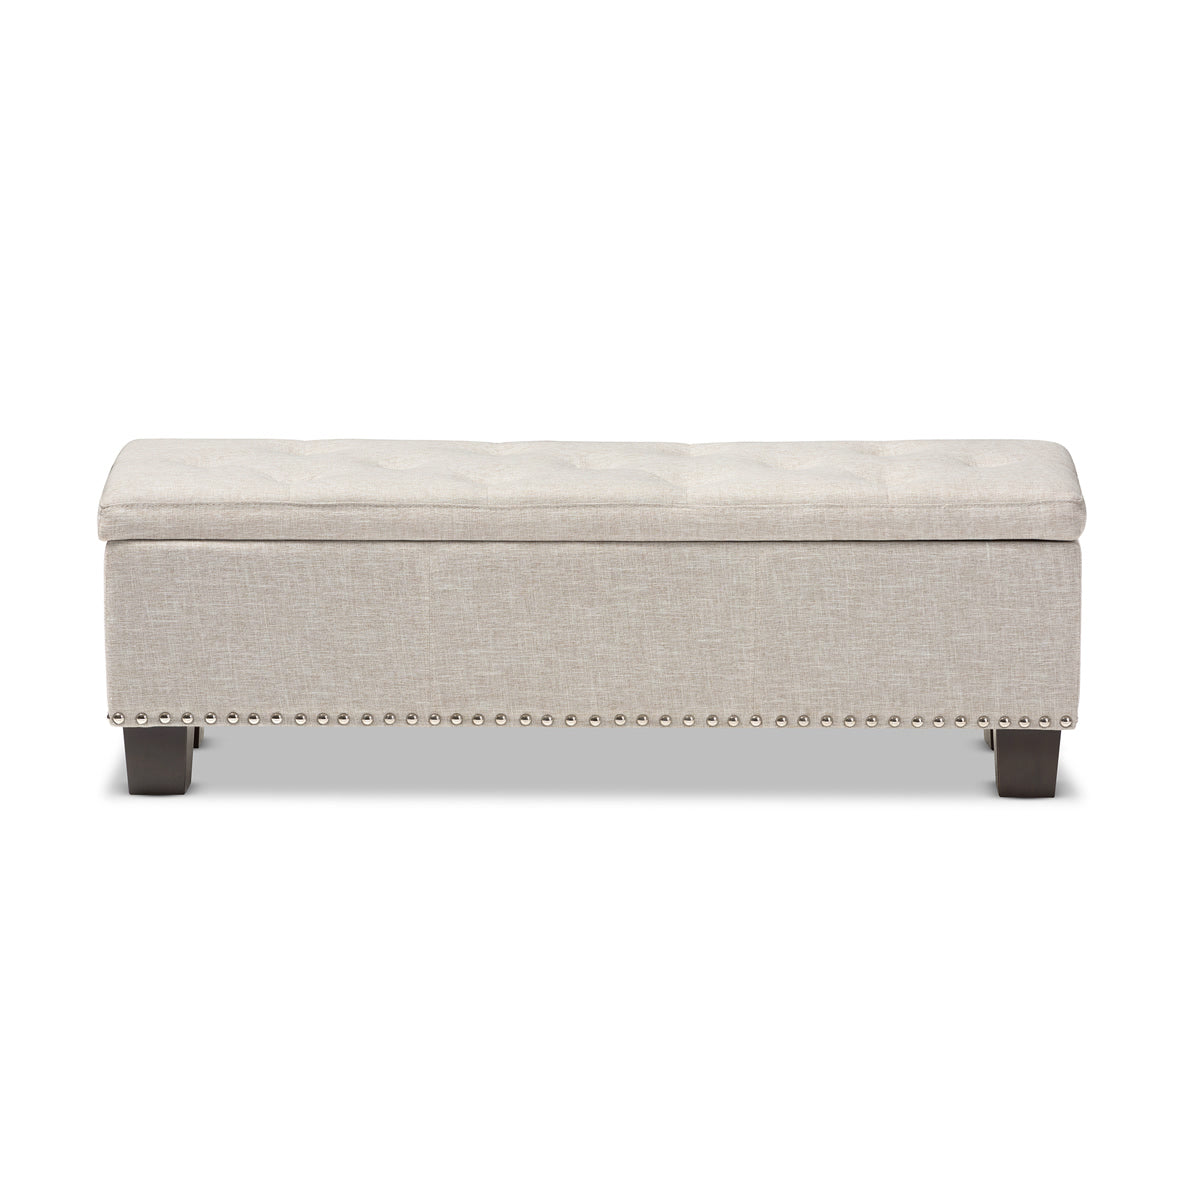 Baxton Studio Hannah Modern and Contemporary Beige Fabric Upholstered Button-Tufting Storage Ottoman Bench Baxton Studio-benches-Minimal And Modern - 4